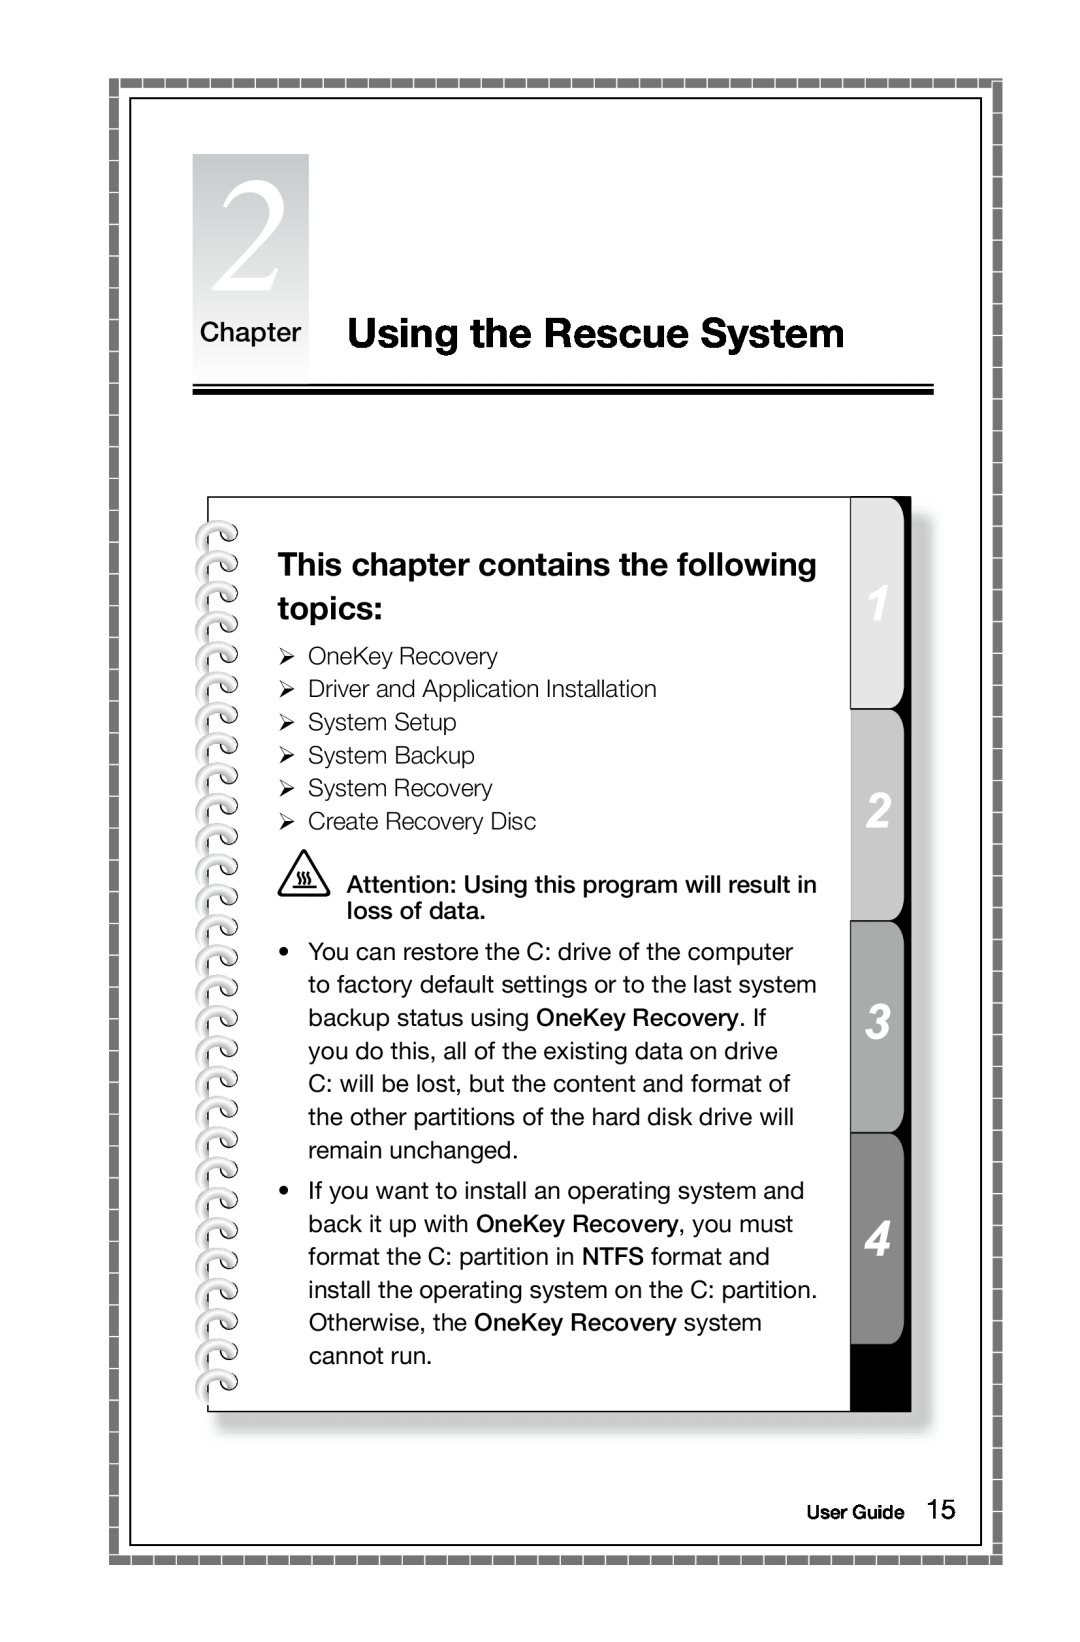 Lenovo 10068/7752, 10059/7723, 10060/7724 manual Chapter Using the Rescue System, This chapter contains the following topics 